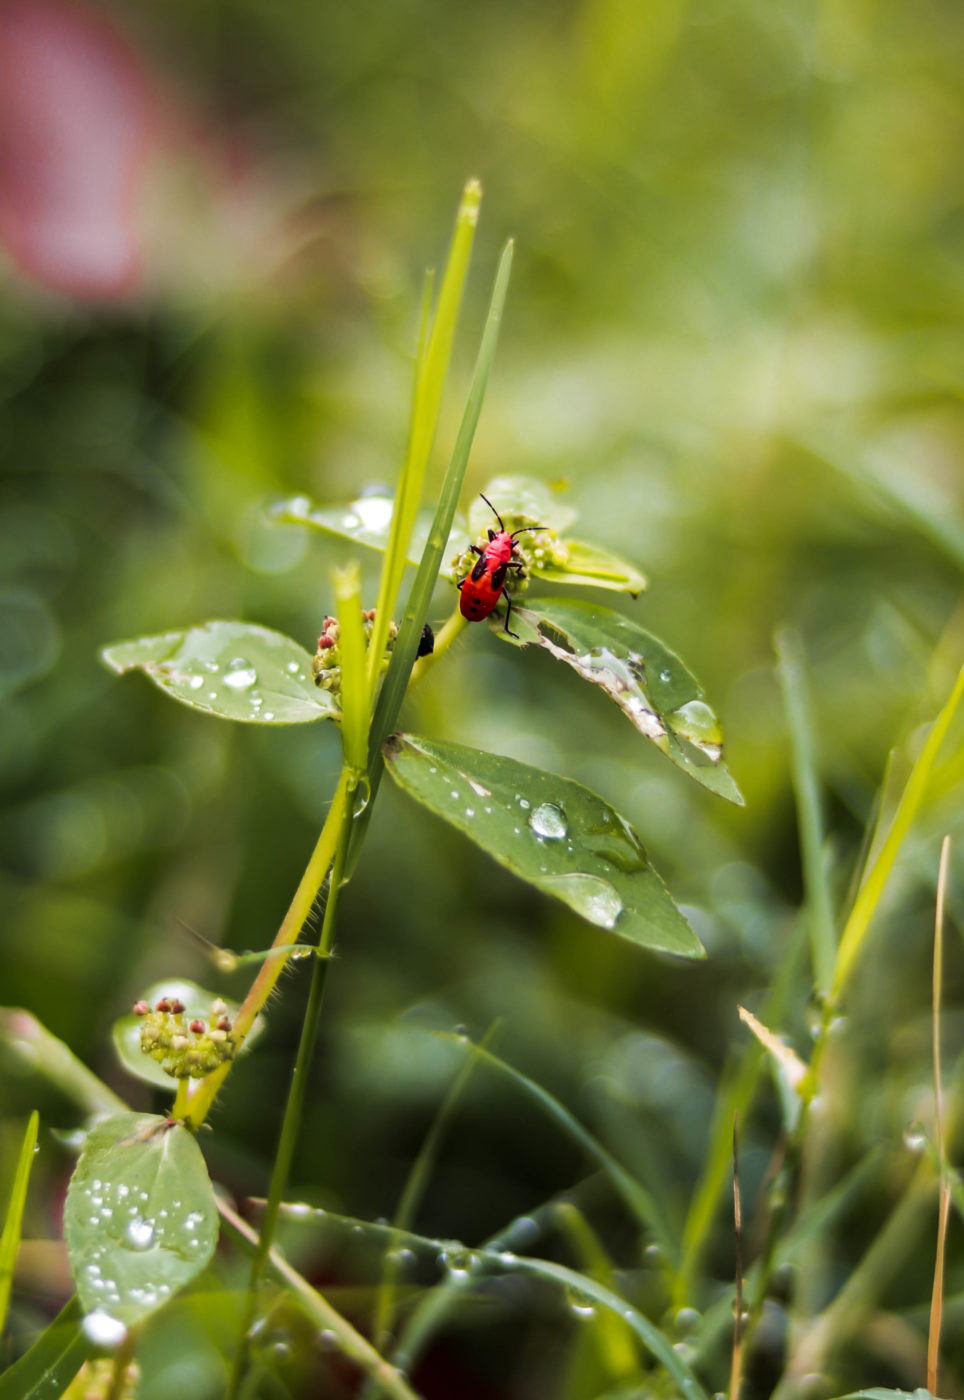 Small red hemiptera on a green plant